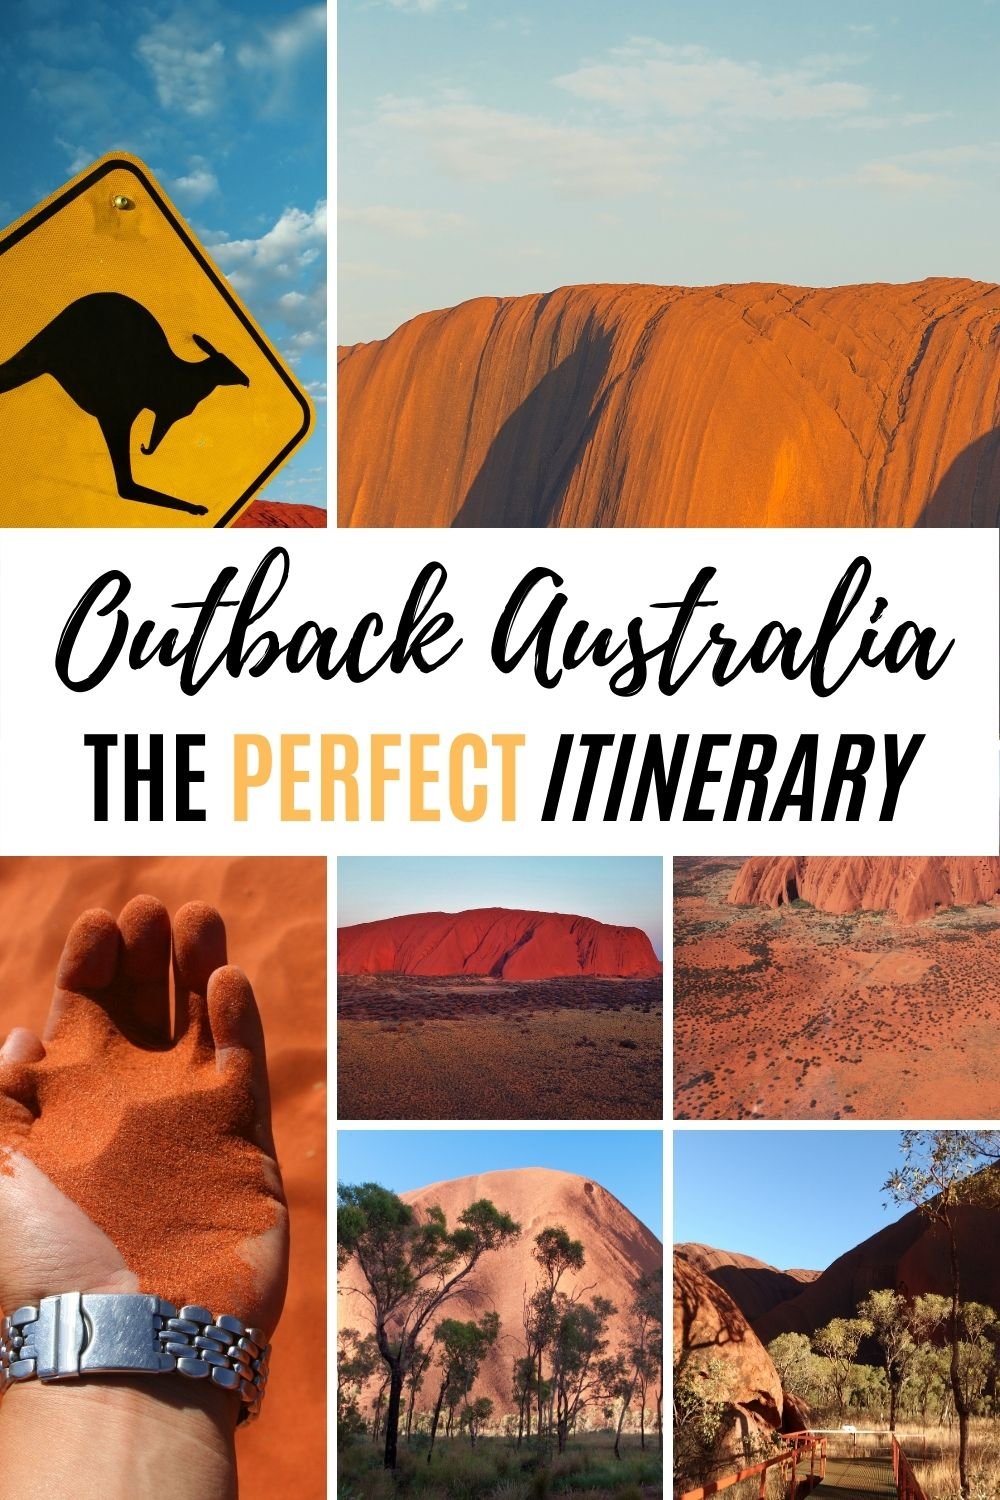 The best Australian Outback Itinerary. A comprehensive road trip of the Australian outback. Enjoy the sights from Adelaide to Alice Springs, including the famous Uluru and Kings Canyon and the Kata-Tjuta on this epic Australian outback road trip itinerary. #outback #australia #Itinerary #outbackaustralia #australianroadtrip